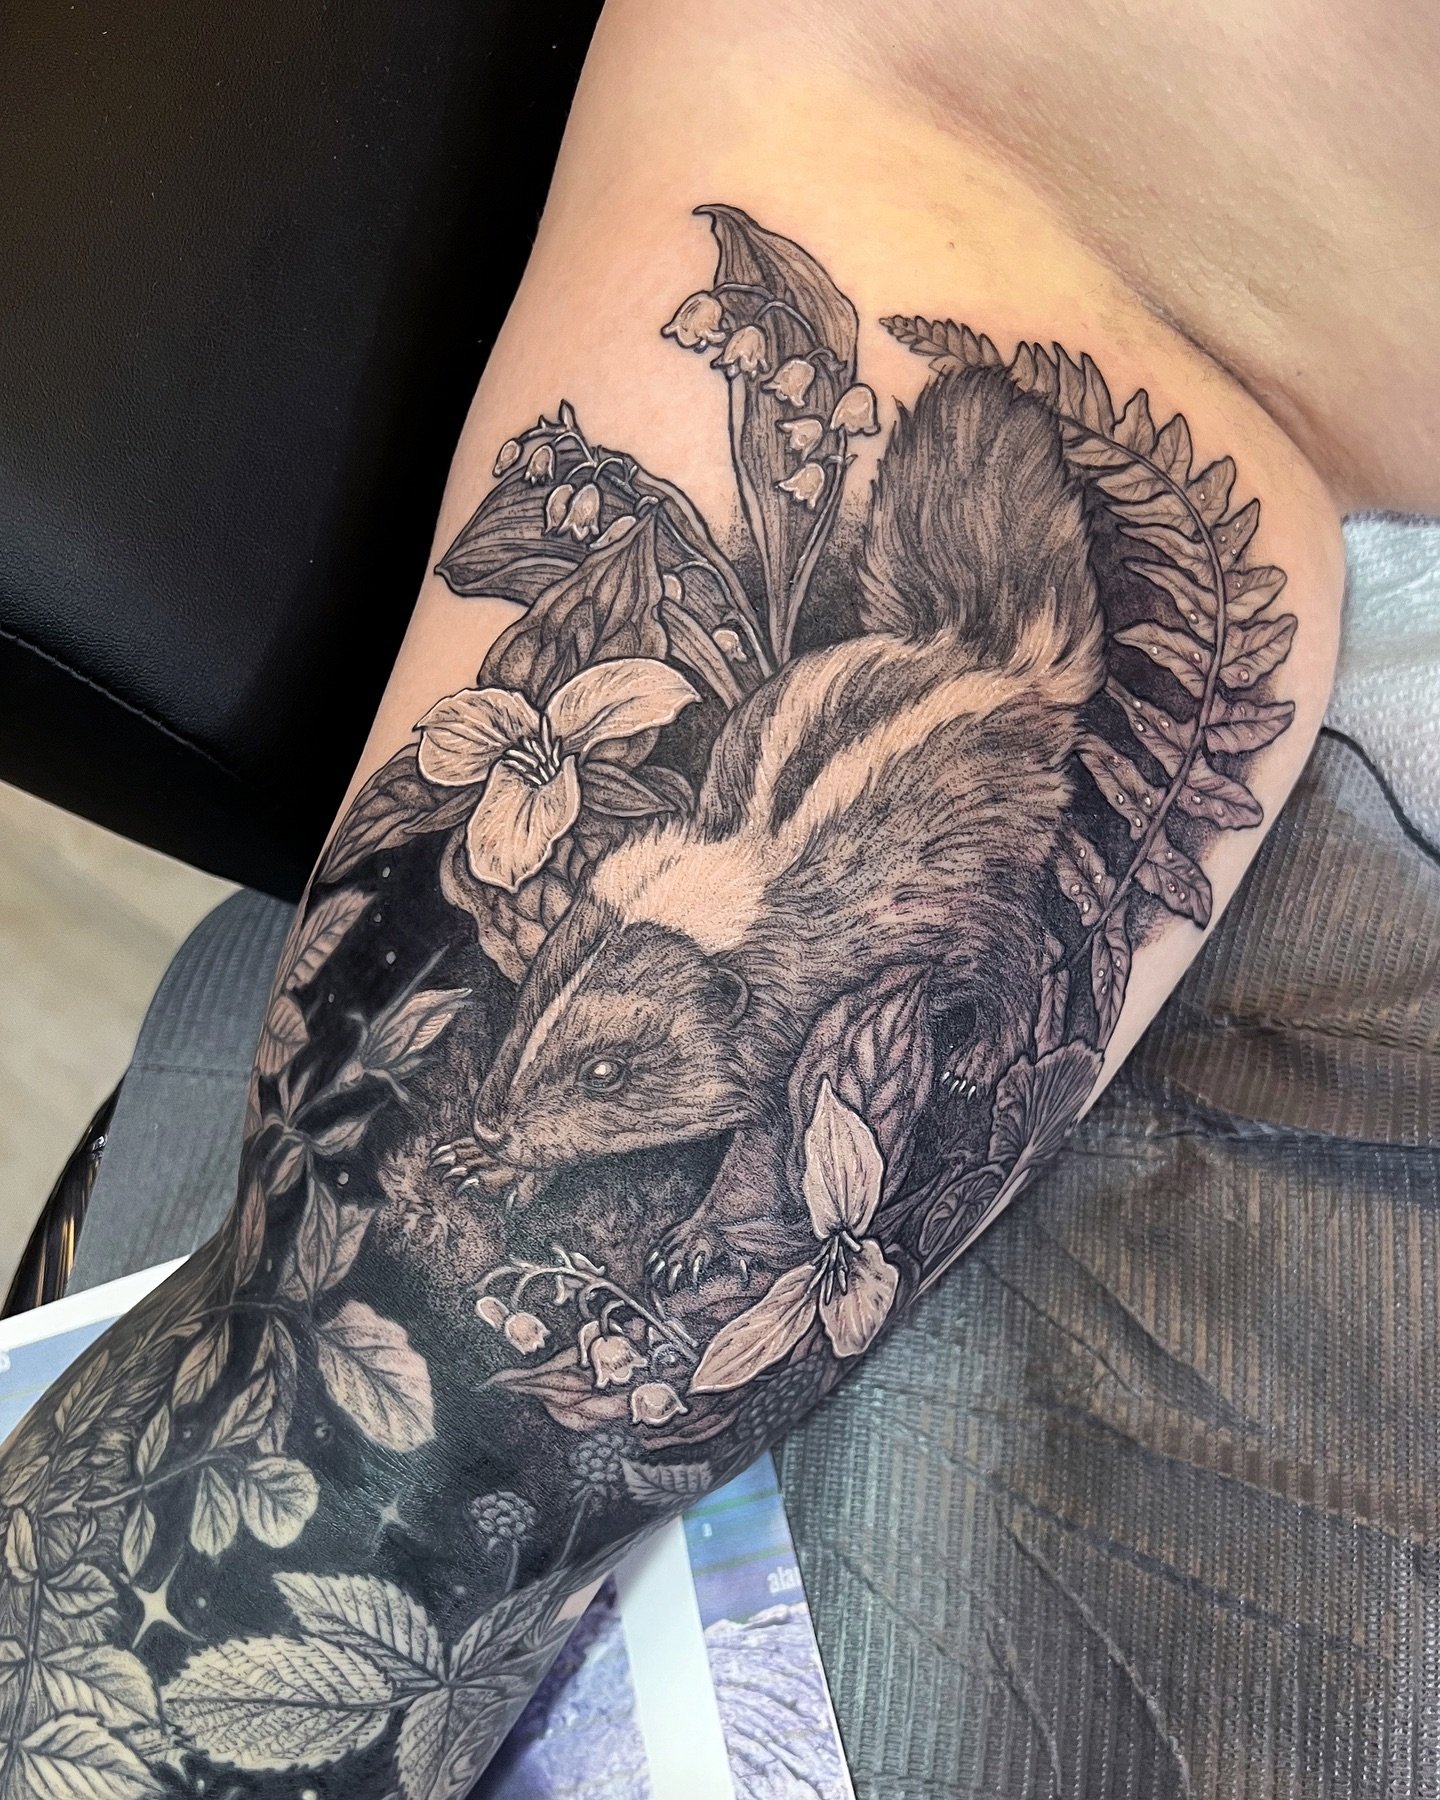 Bb skunk 🦨 with trillium and lily of the valley ✨ black background sleeve in prog 💕 Thanks for your dedication A!